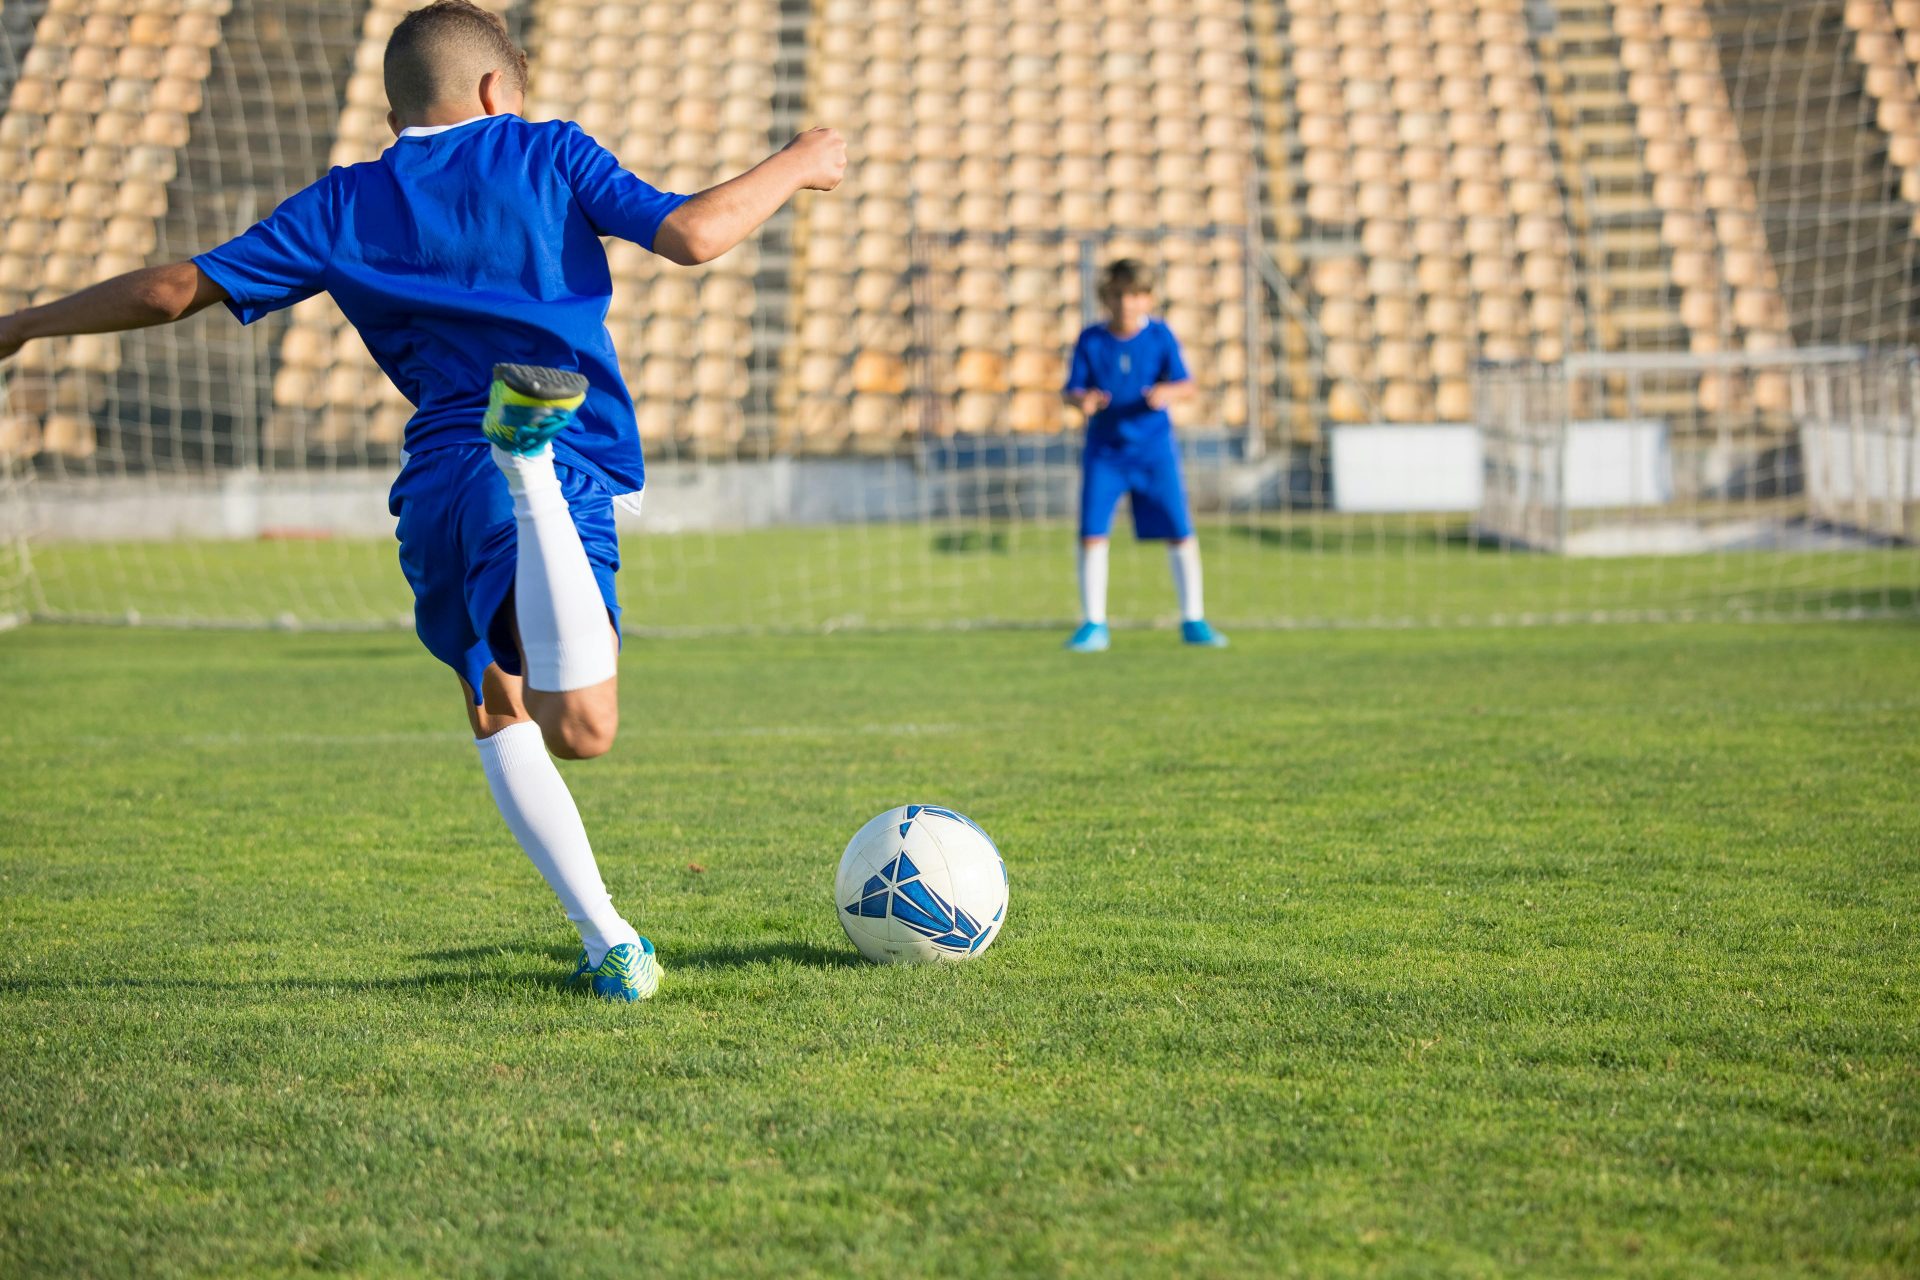 Child dressed in blue jersey and shorts about to kick a soccer ball to his friend.